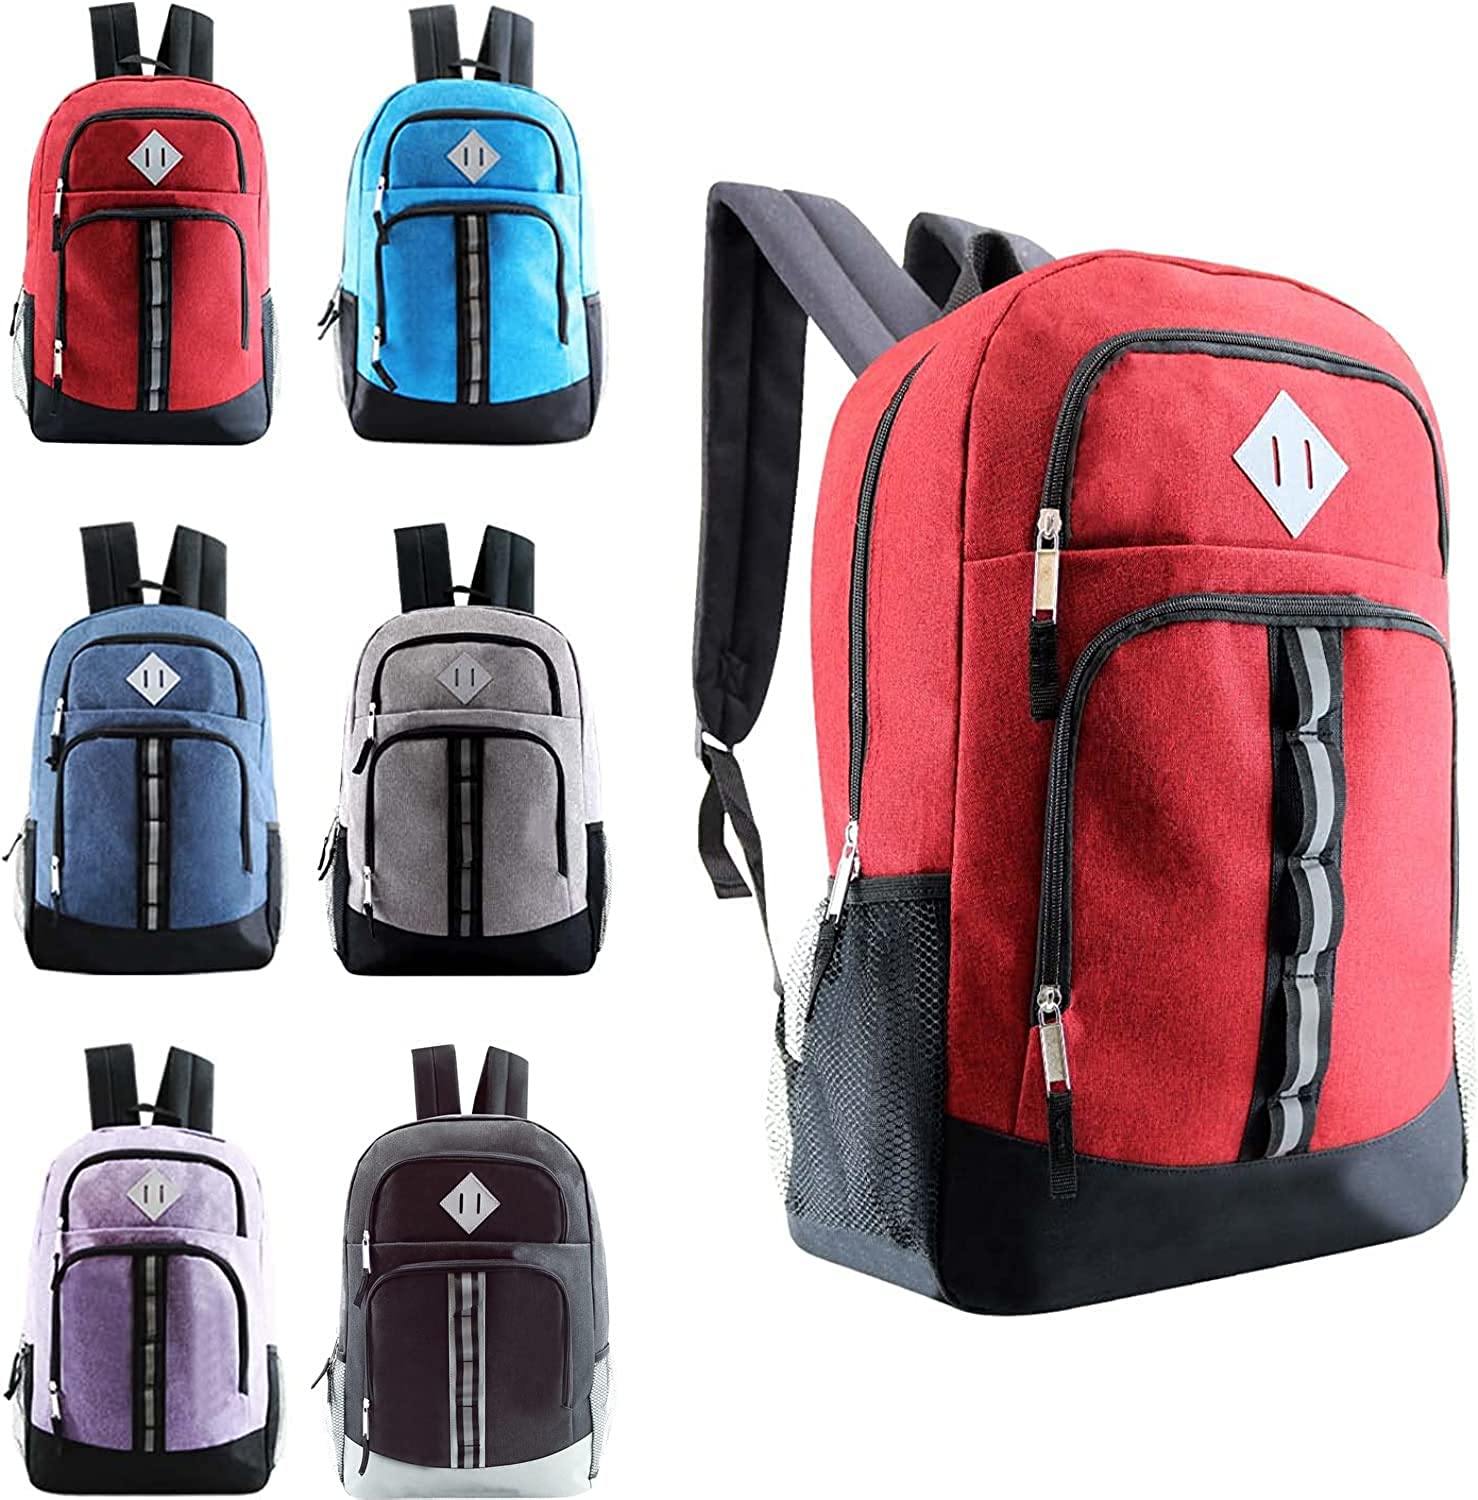 ''18'''' Deluxe Classic Style Two Tone BACKPACKs w/ Embroidered Locker Loops & Mesh Pockets - Assorted 